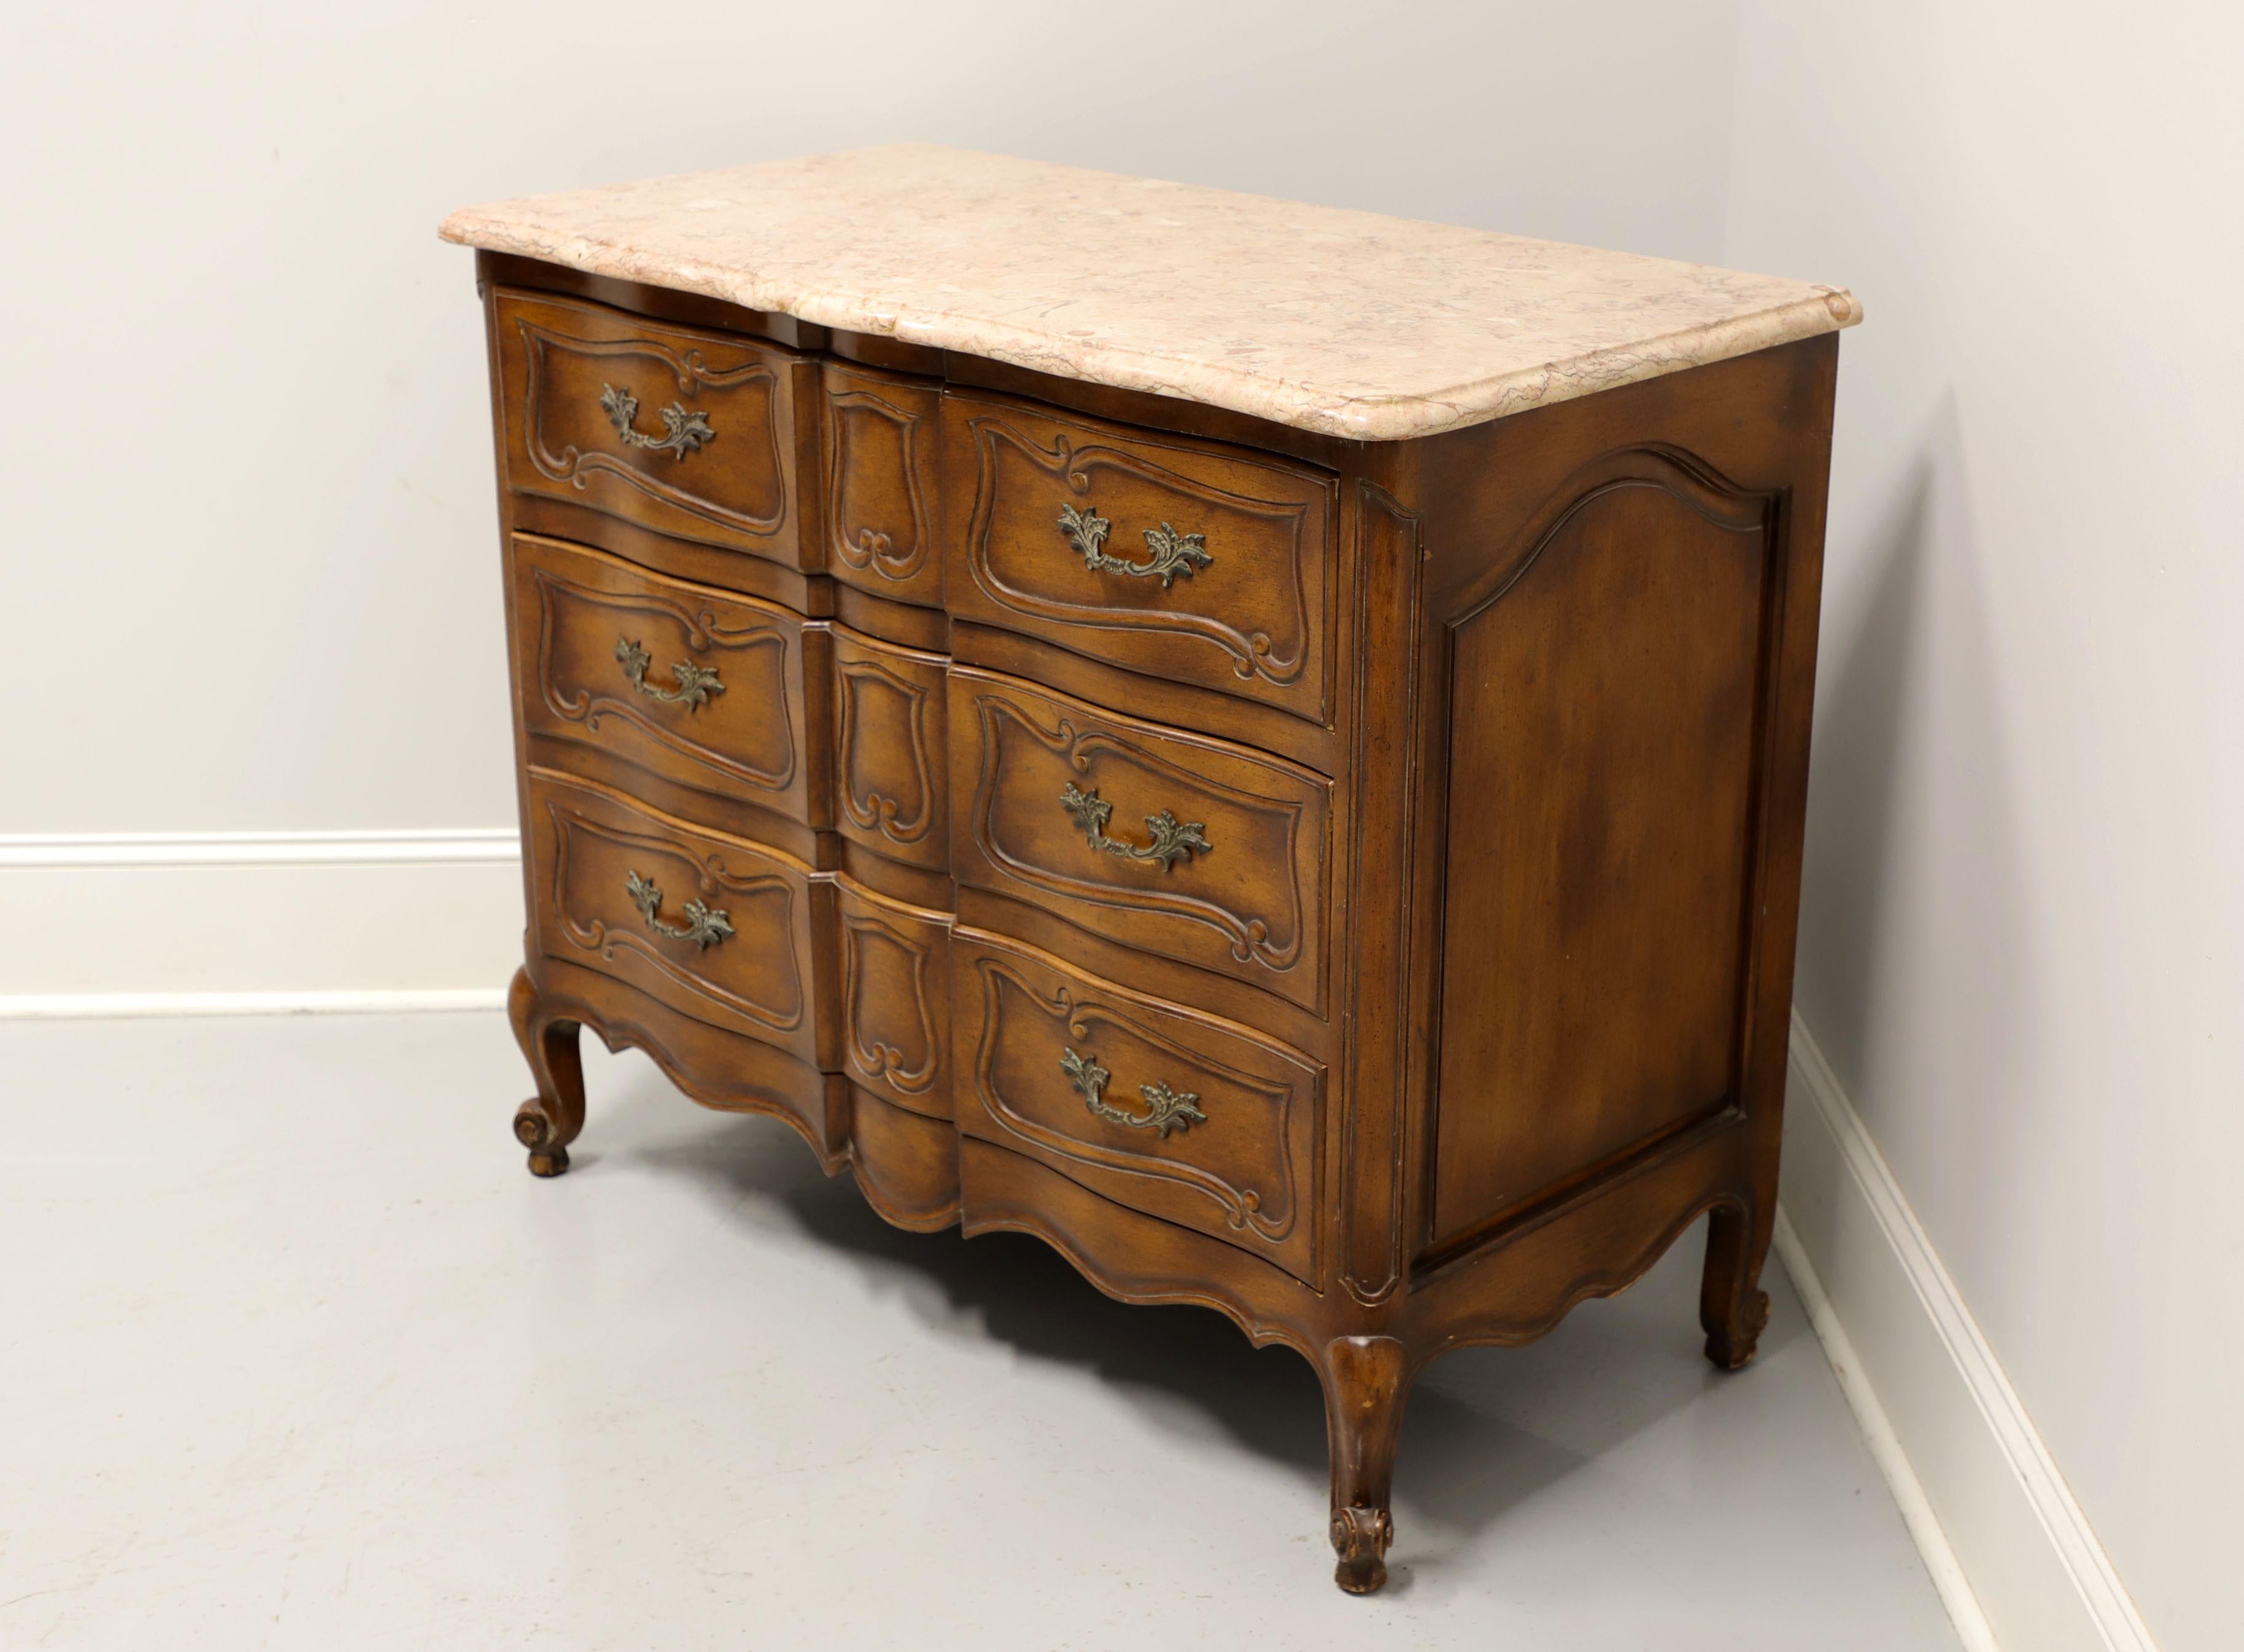 French Provincial Vintage French Country Style Bachelor Chest with Marble Top - A For Sale